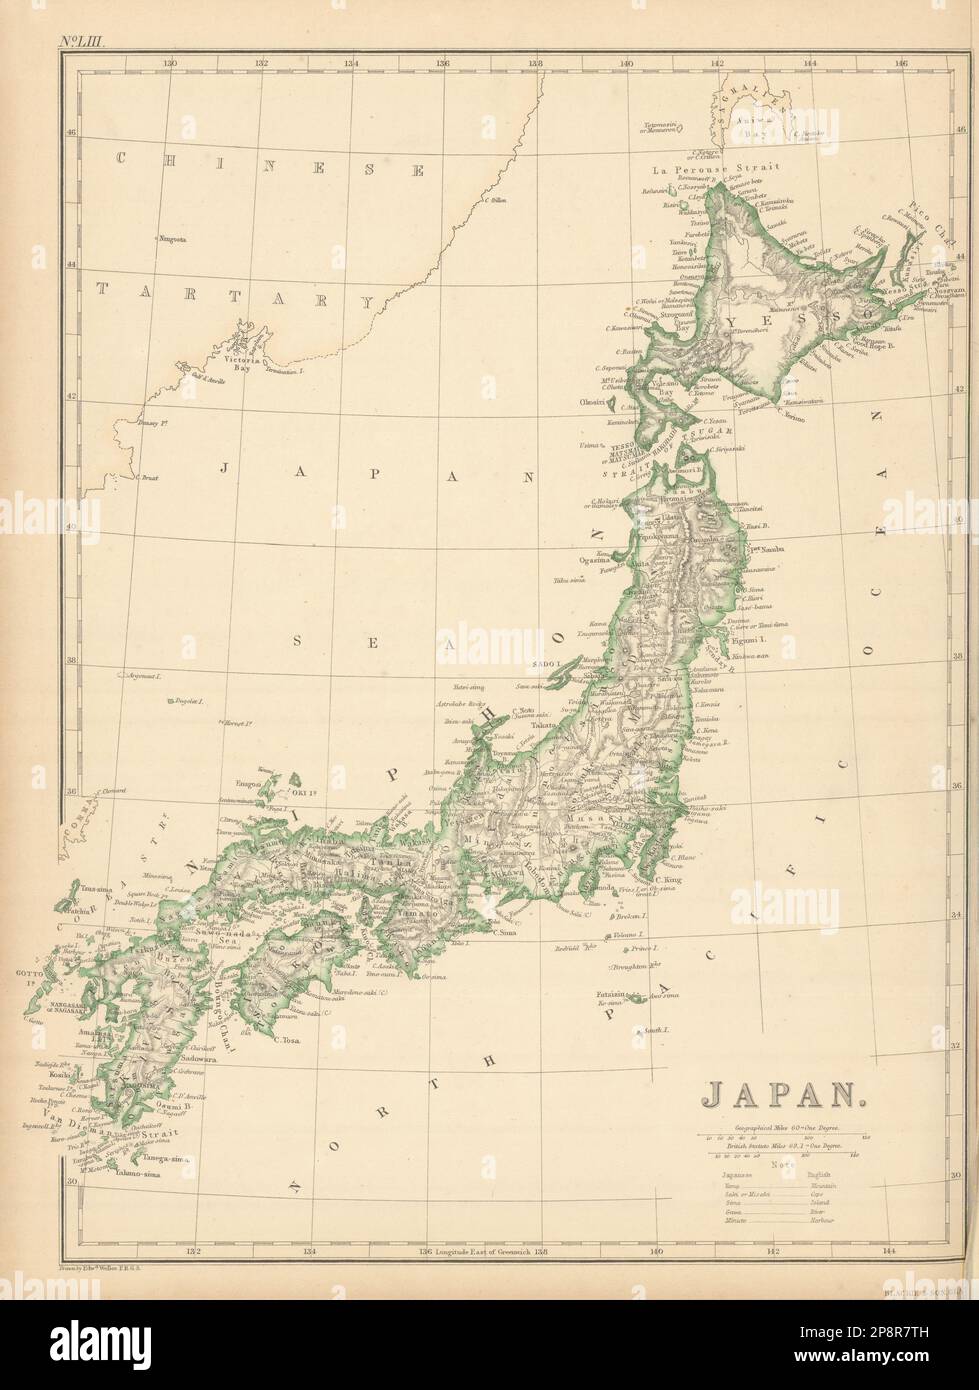 Japan by Edward Weller 1859 old antique vintage map plan chart Stock Photo